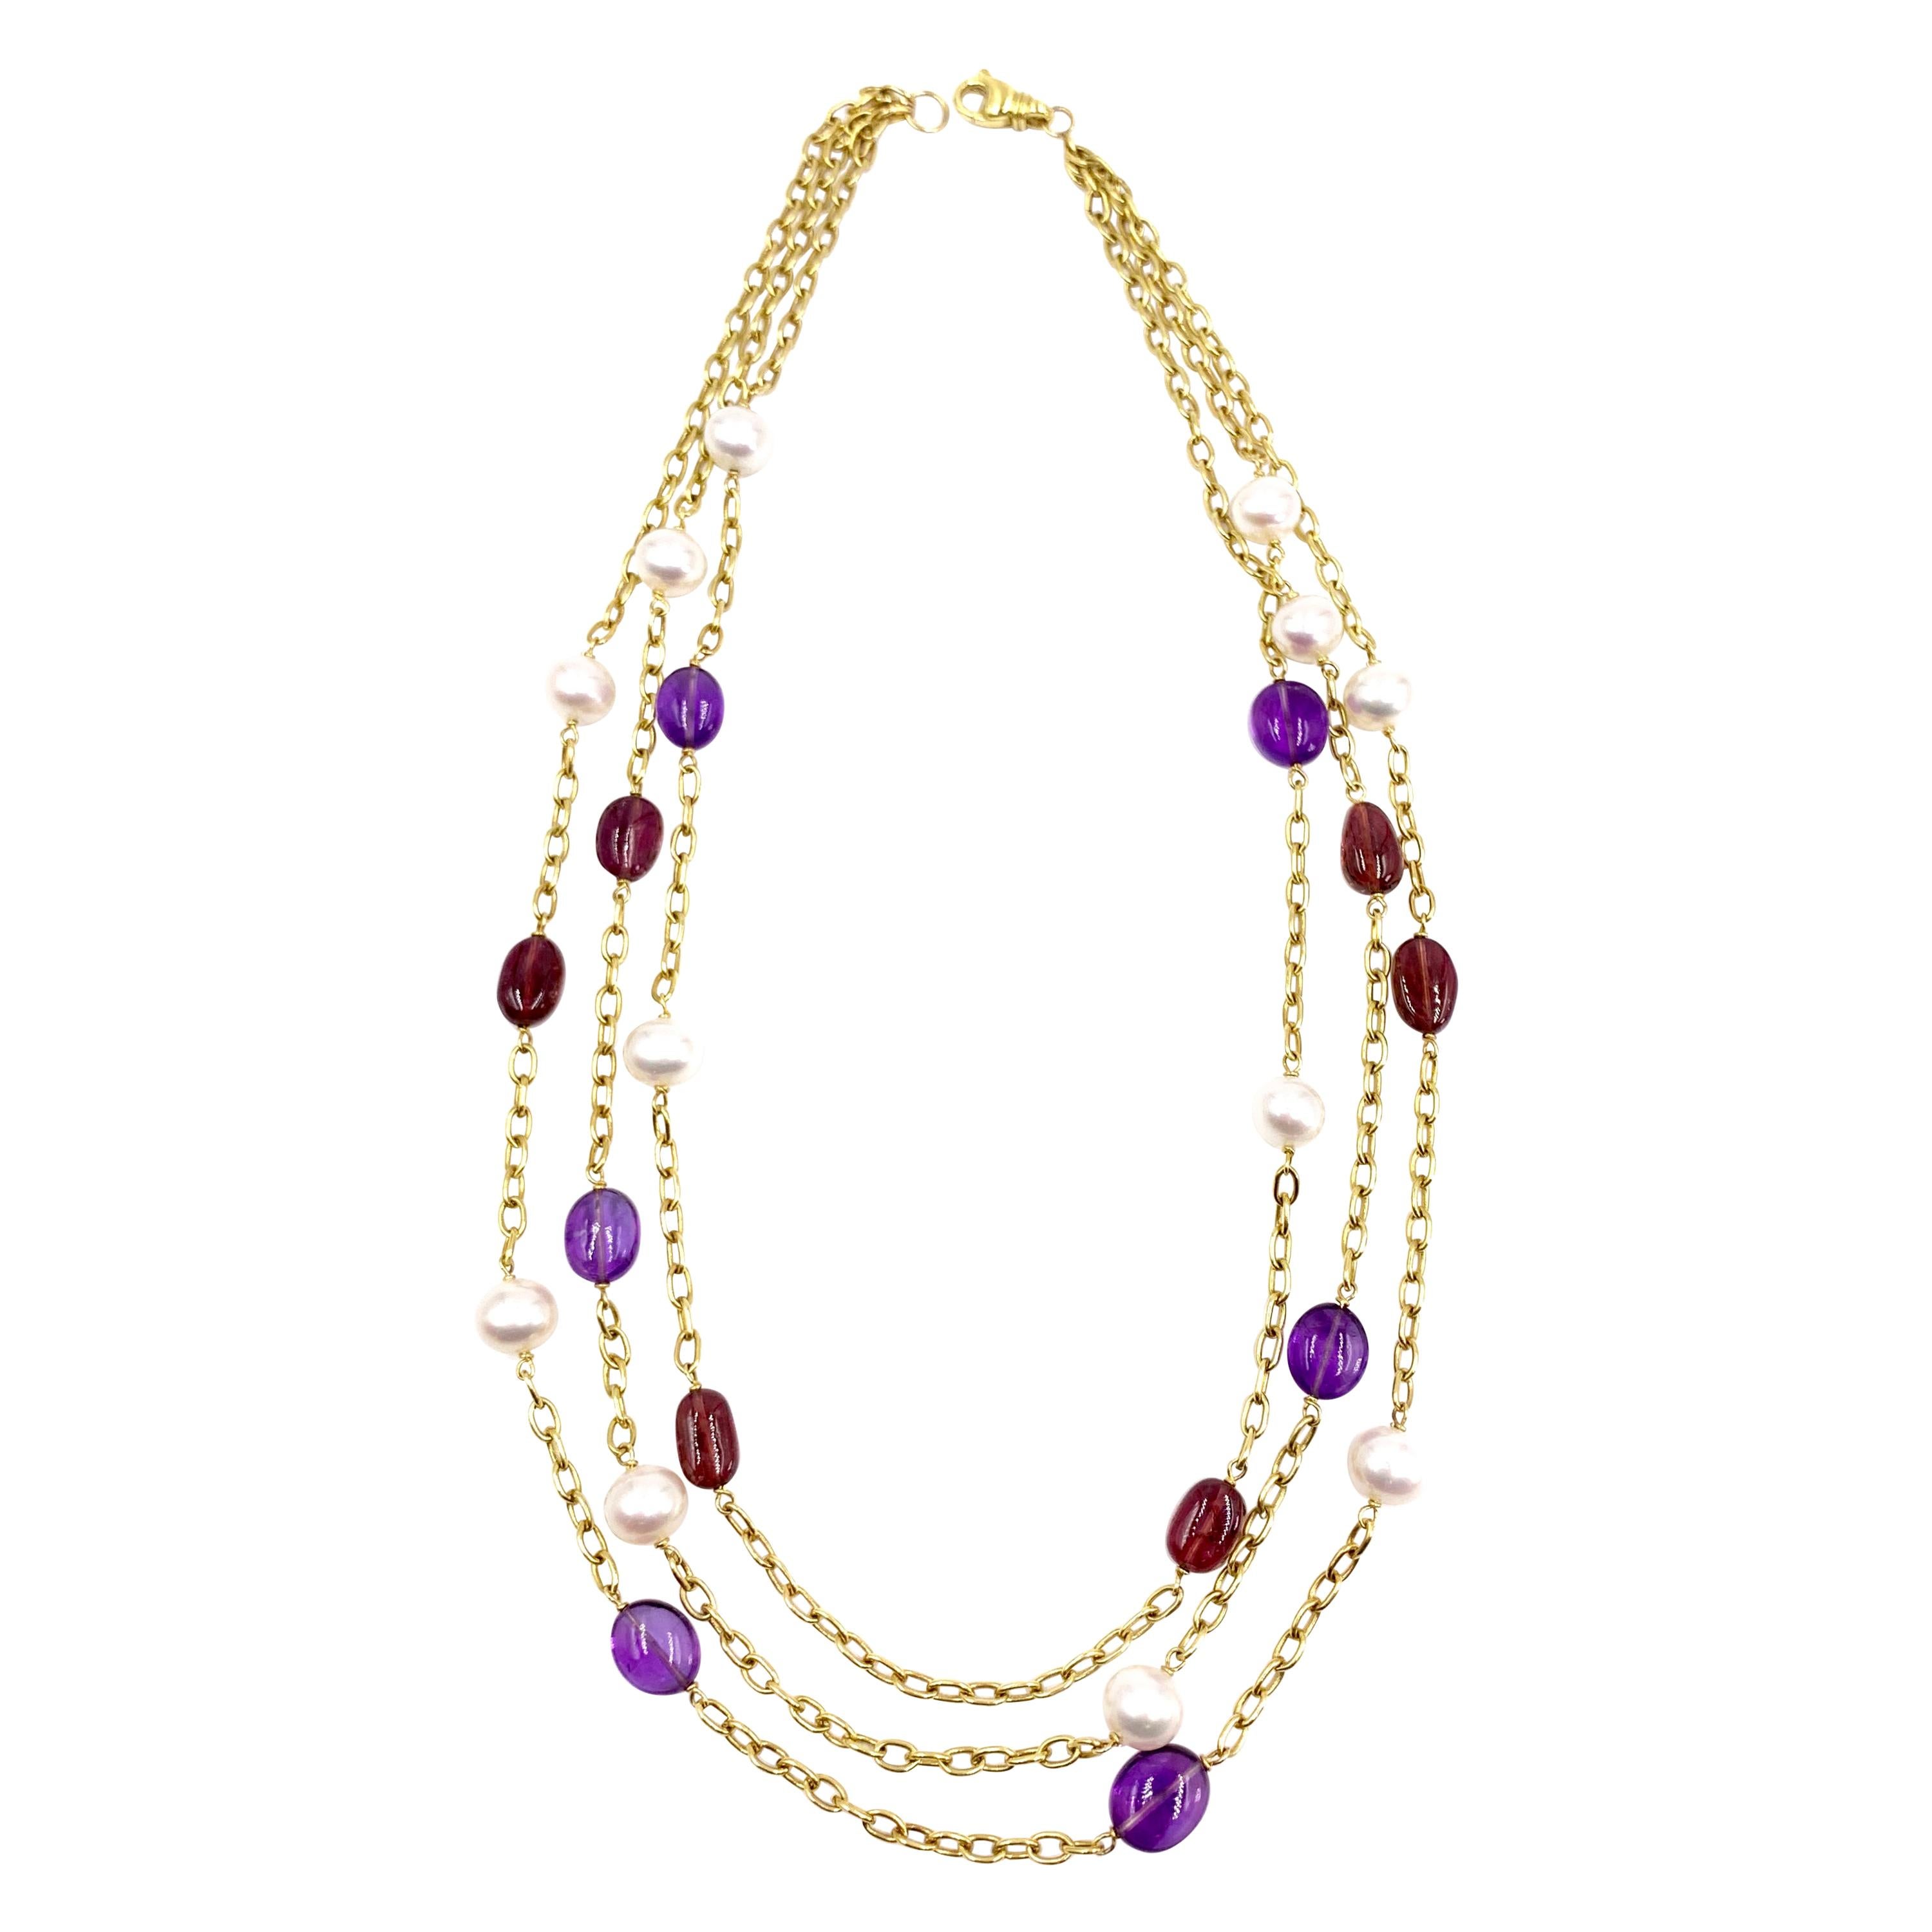 18 Karat Gold Three-Strand Pearl, Amethyst and Tourmaline Necklace For Sale